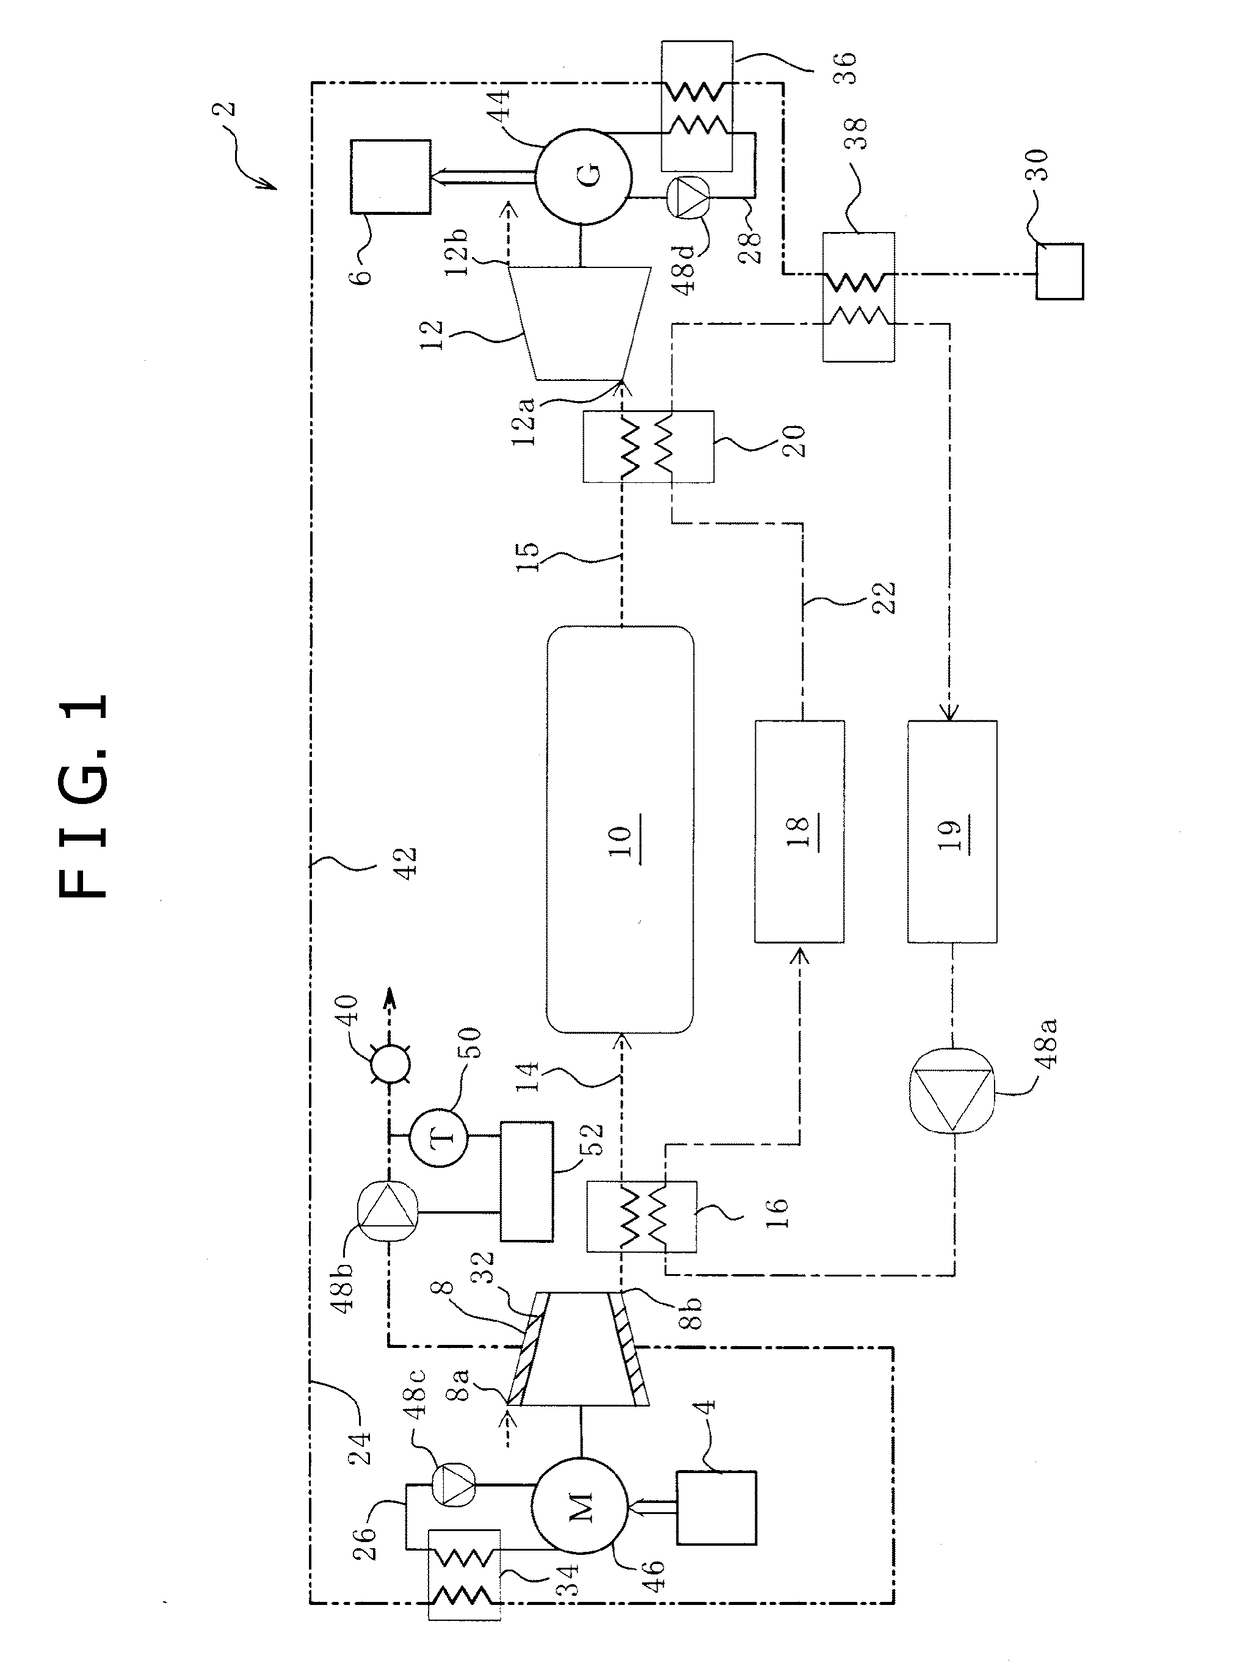 Compressed air energy storage and power generation device